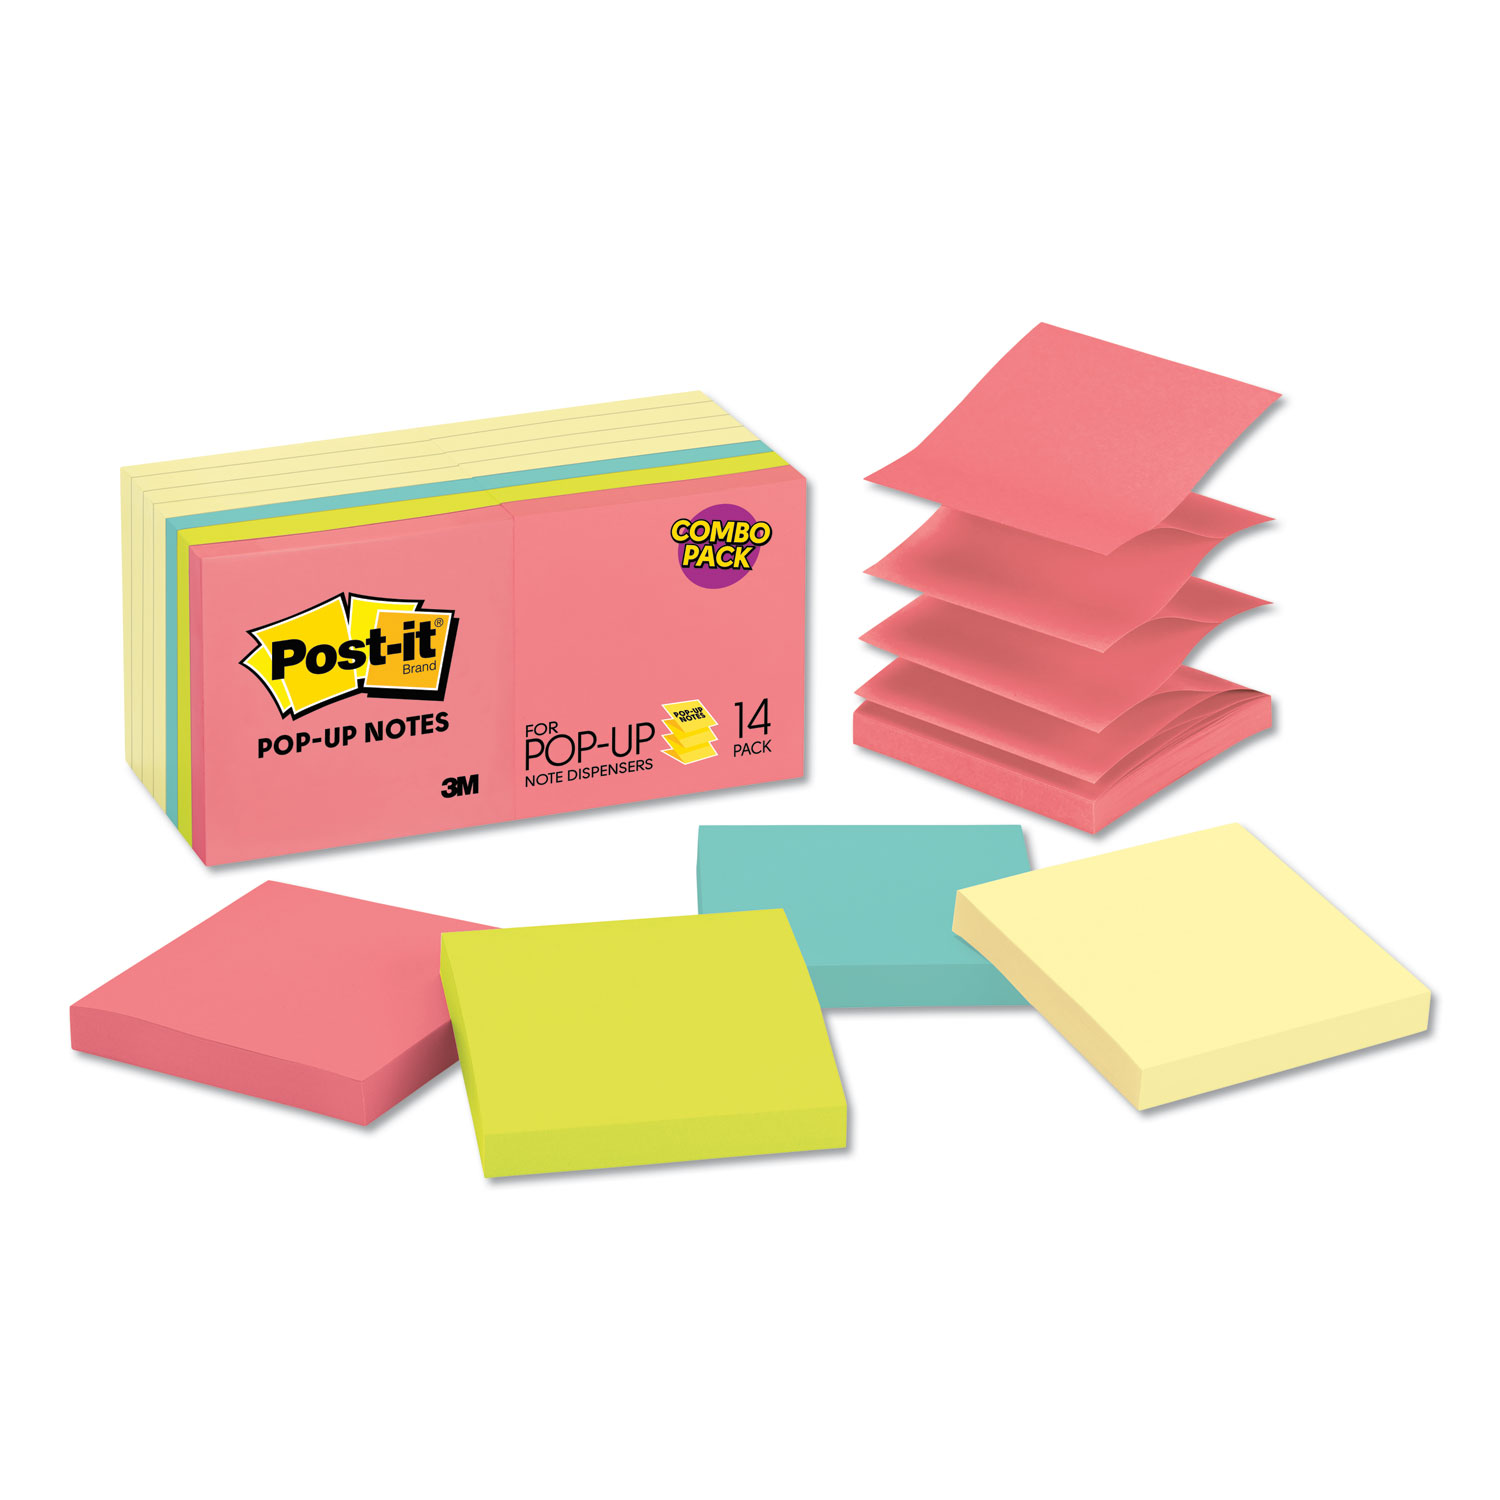  Post-it Pop-up Notes R330-14YWM Original Pop-up Notes Value Pack, 3 x 3, Canary Yellow/Cape Town, 100-Sheet (MMMR33014YWM) 